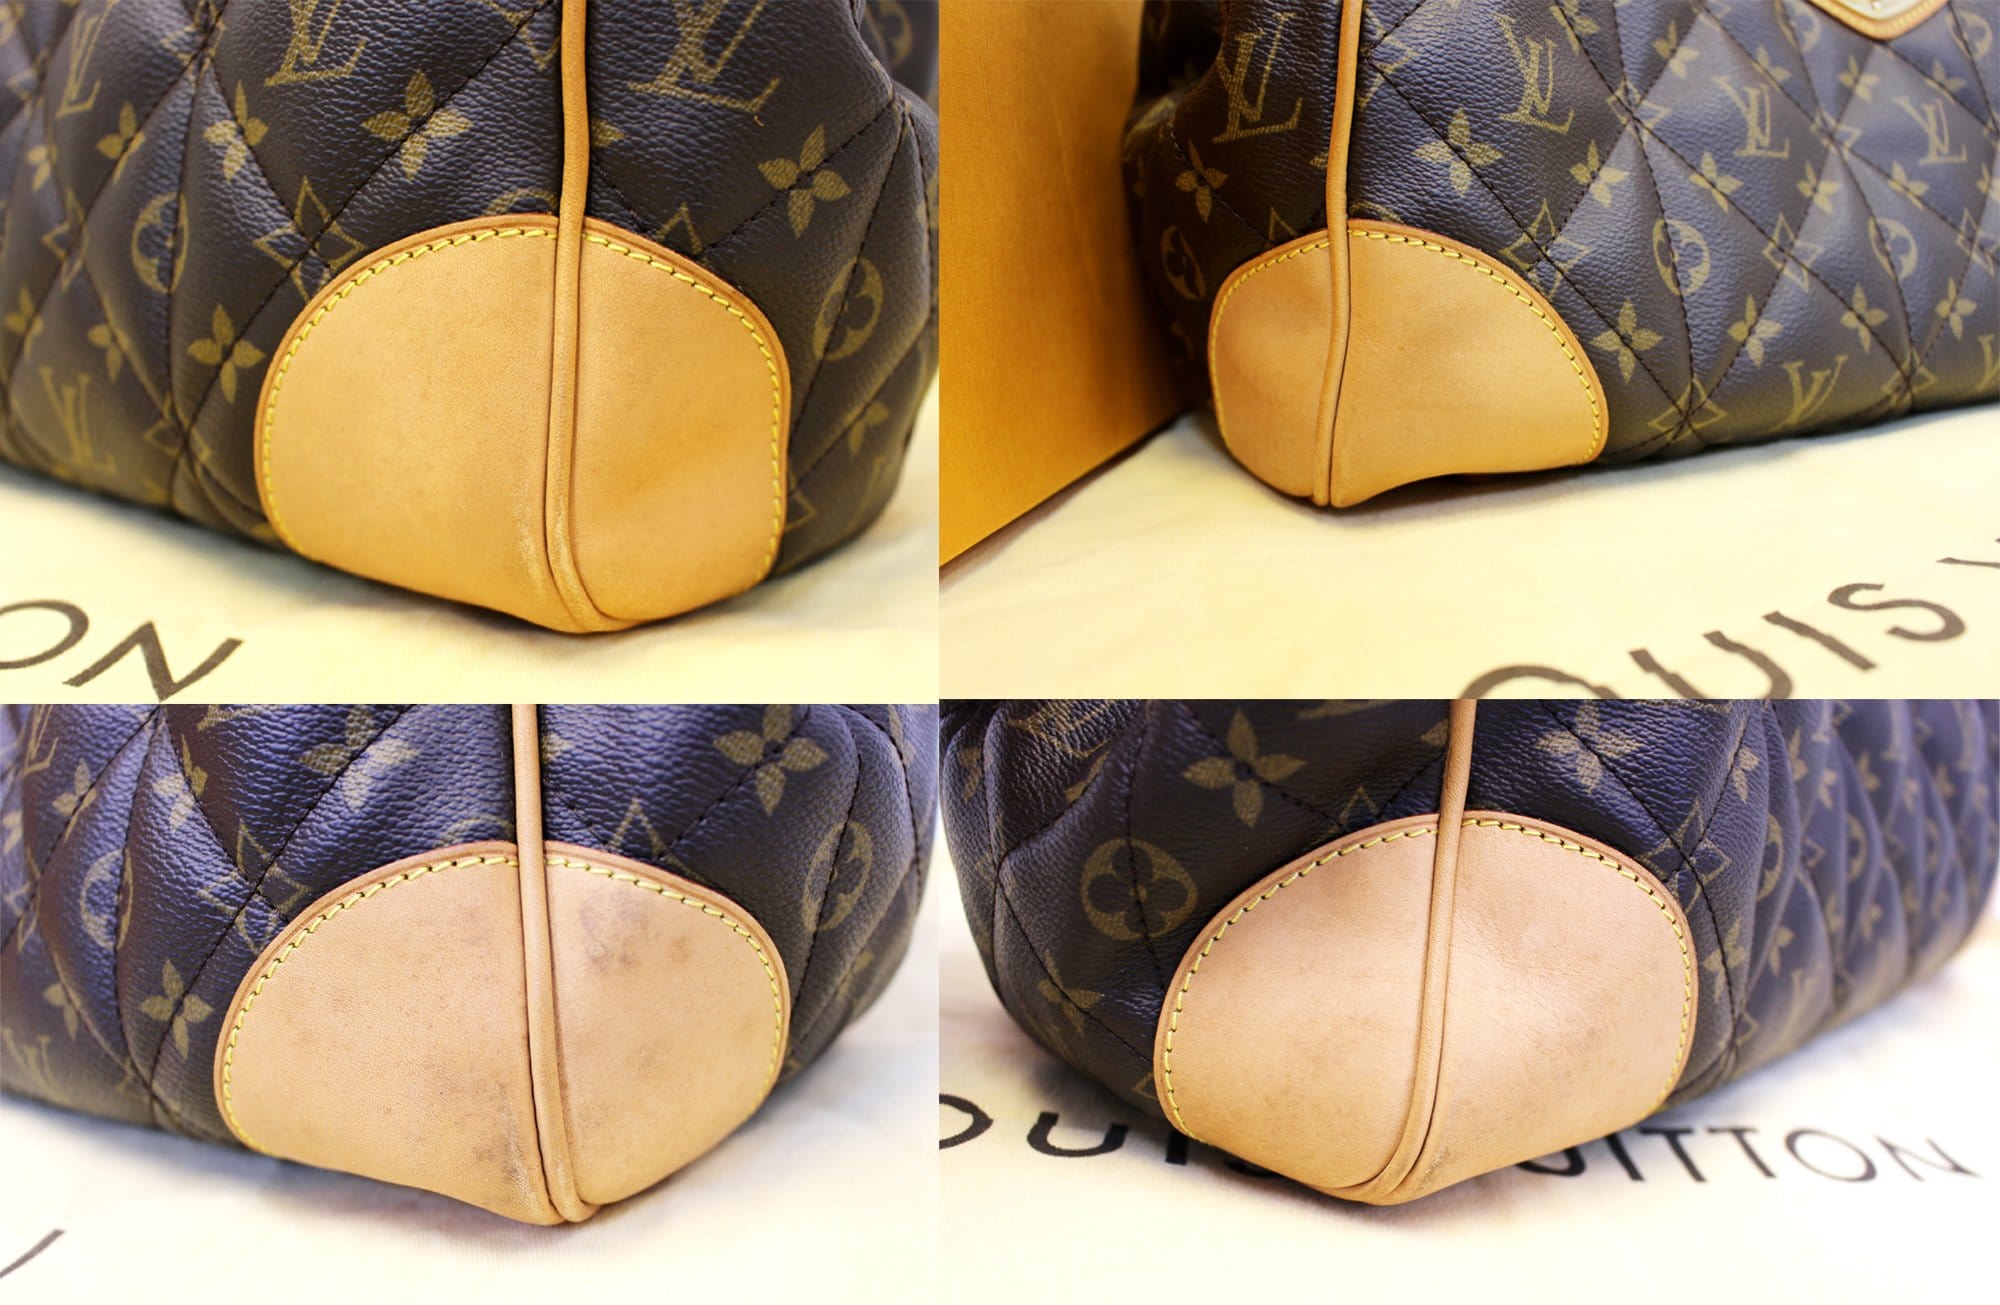 Louis Vuitton Monogram Etoile Bag Reference Guide - Spotted Fashion